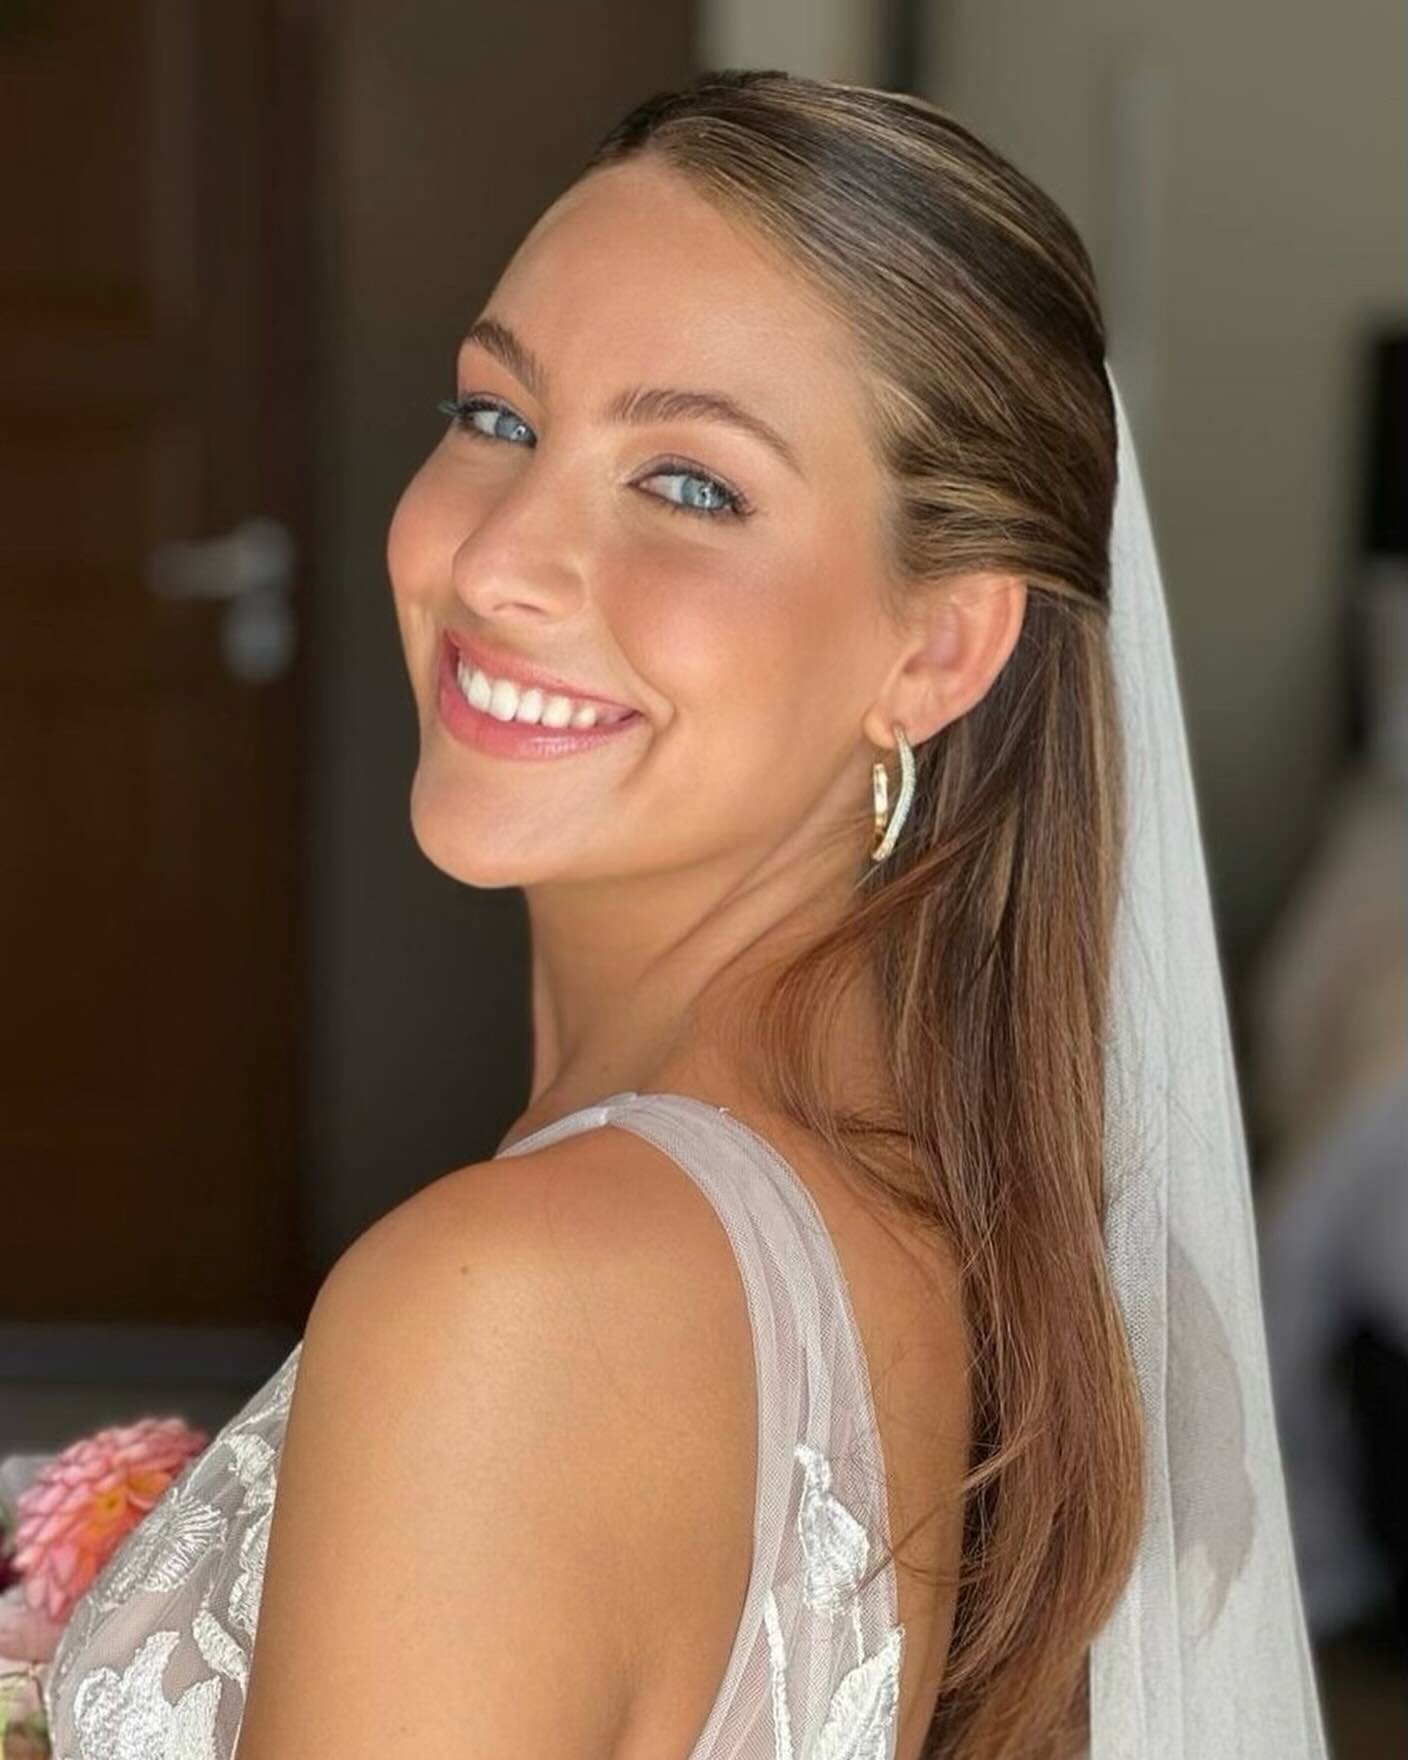 Enchanting Lake Como backdrop, flawless beauty, and love in the air. Sophie's wedding day was a dream come true, and I had the honor of making her shine even brighter. 💖✨
.
.
I used @charlottetilbury @schwarzkopfpro @sweedbeauty
.
.
#WeddingHair #la